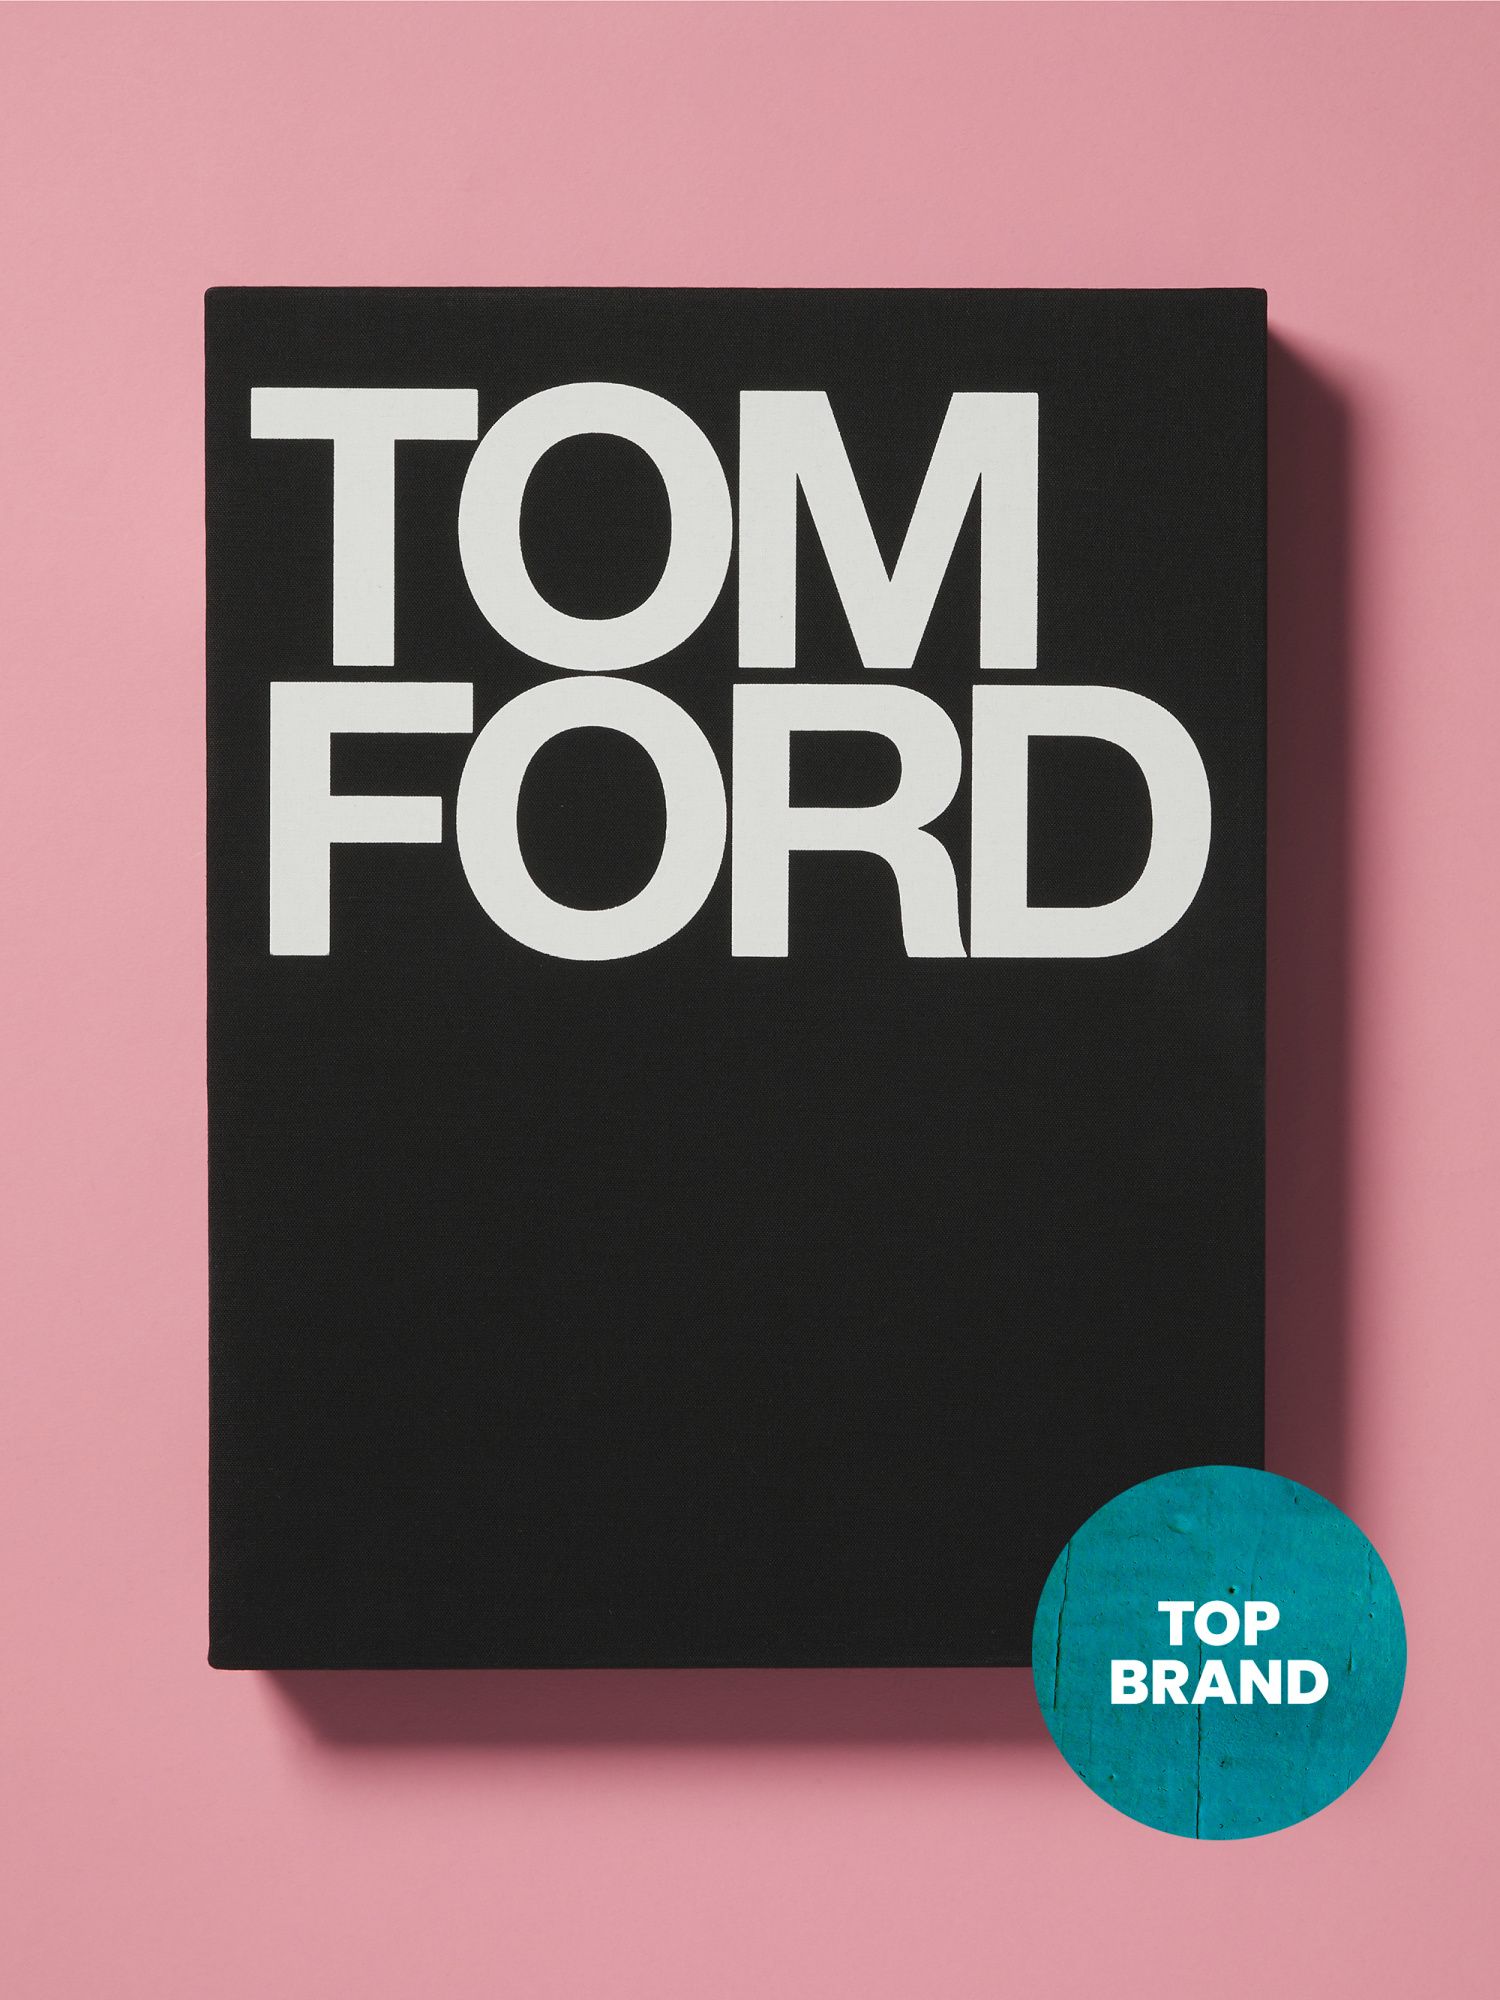 Made In Italy Tom Ford Coffee Table Book | Decorative Accents | HomeGoods | HomeGoods